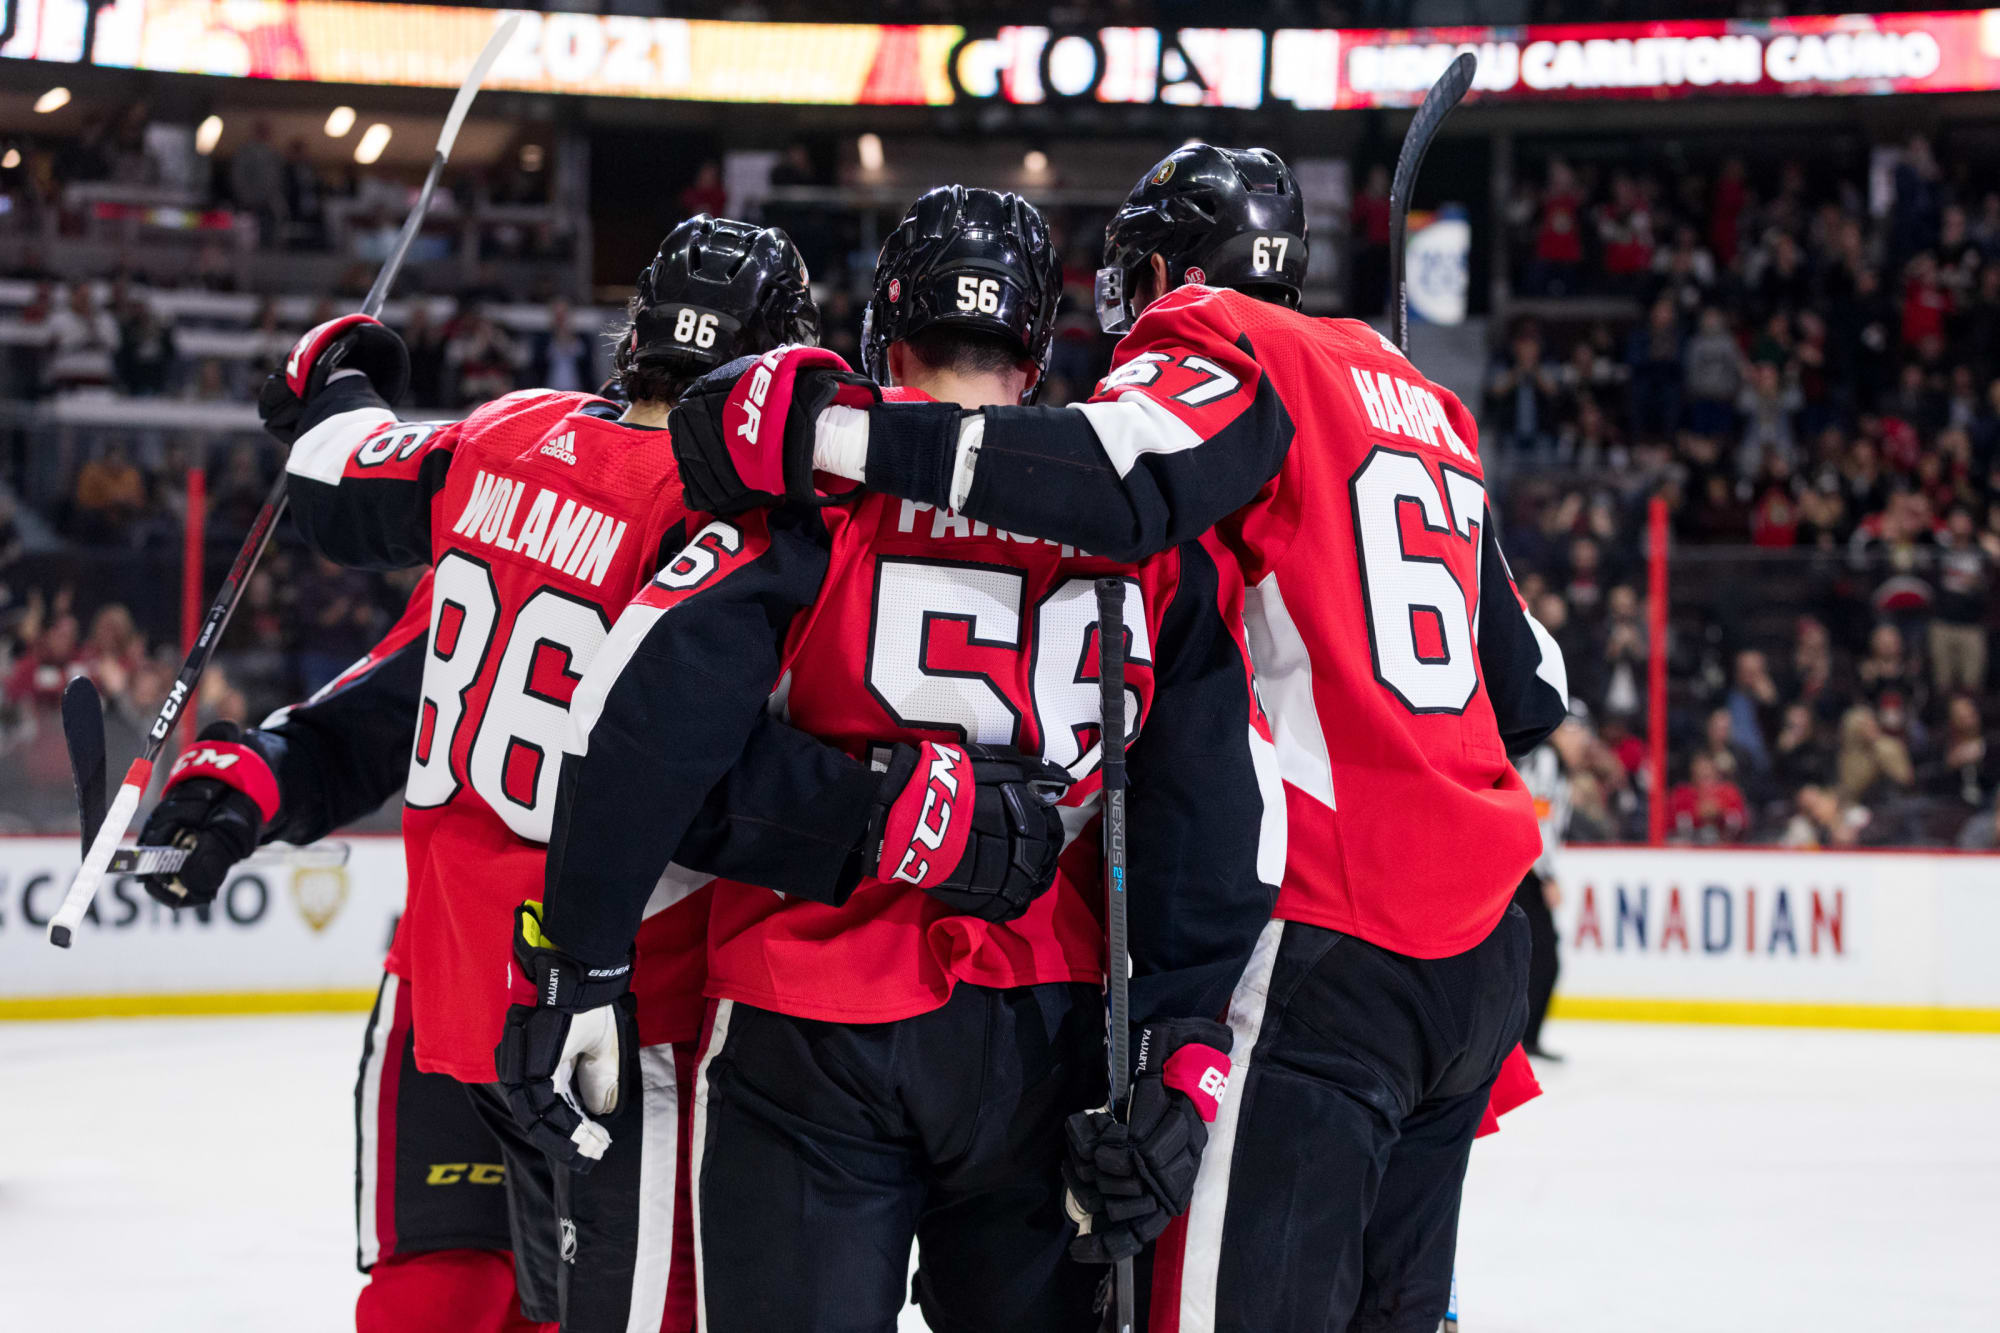 Ottawa Senators: Top 5 players to get excited for in 2019